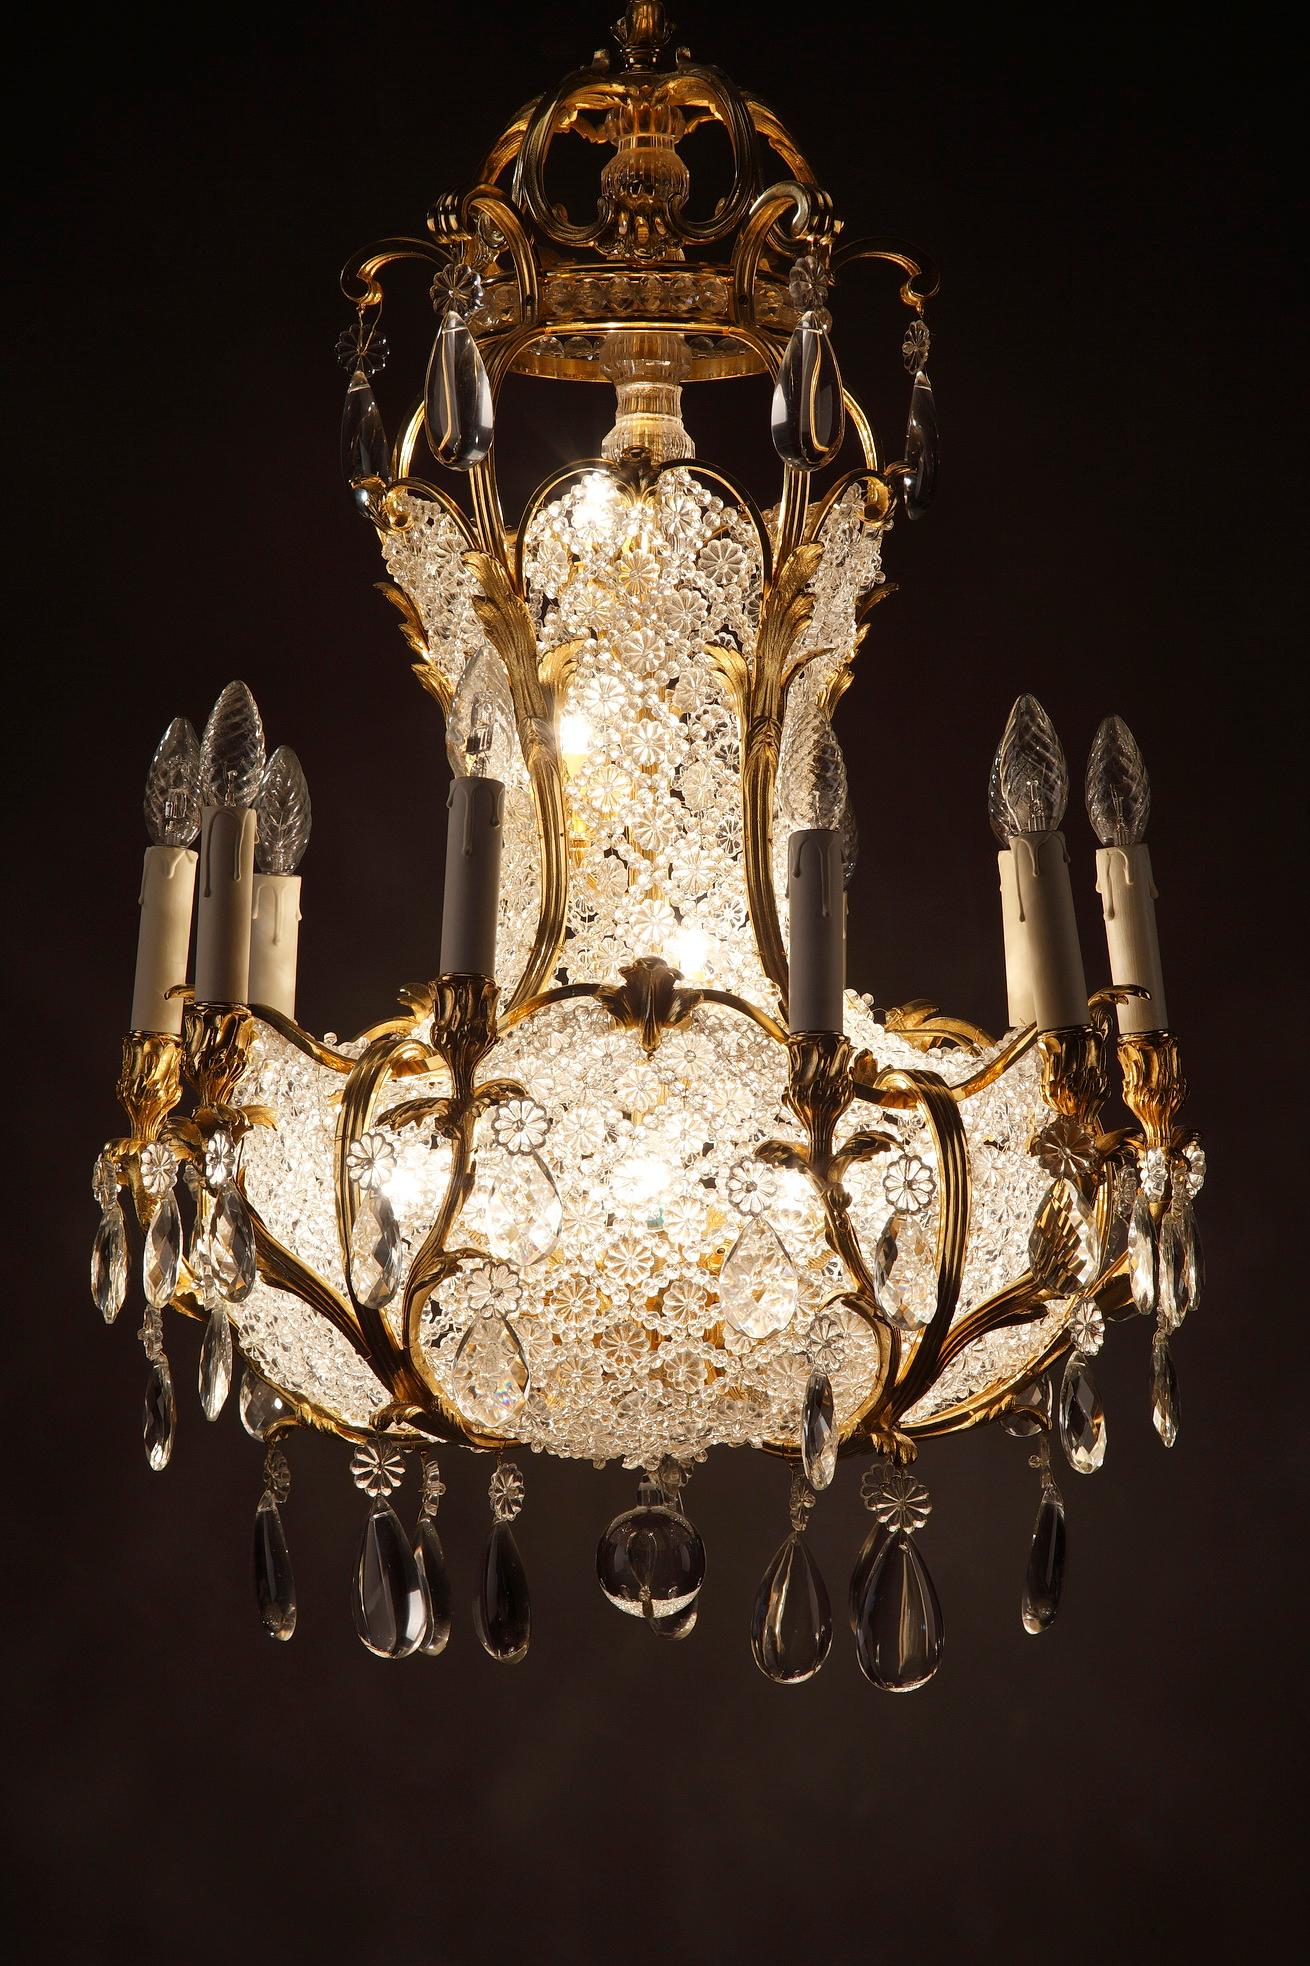 19th Century 10-Light Ormolu and Crystal Basket-Shaped Chandelier For Sale 9